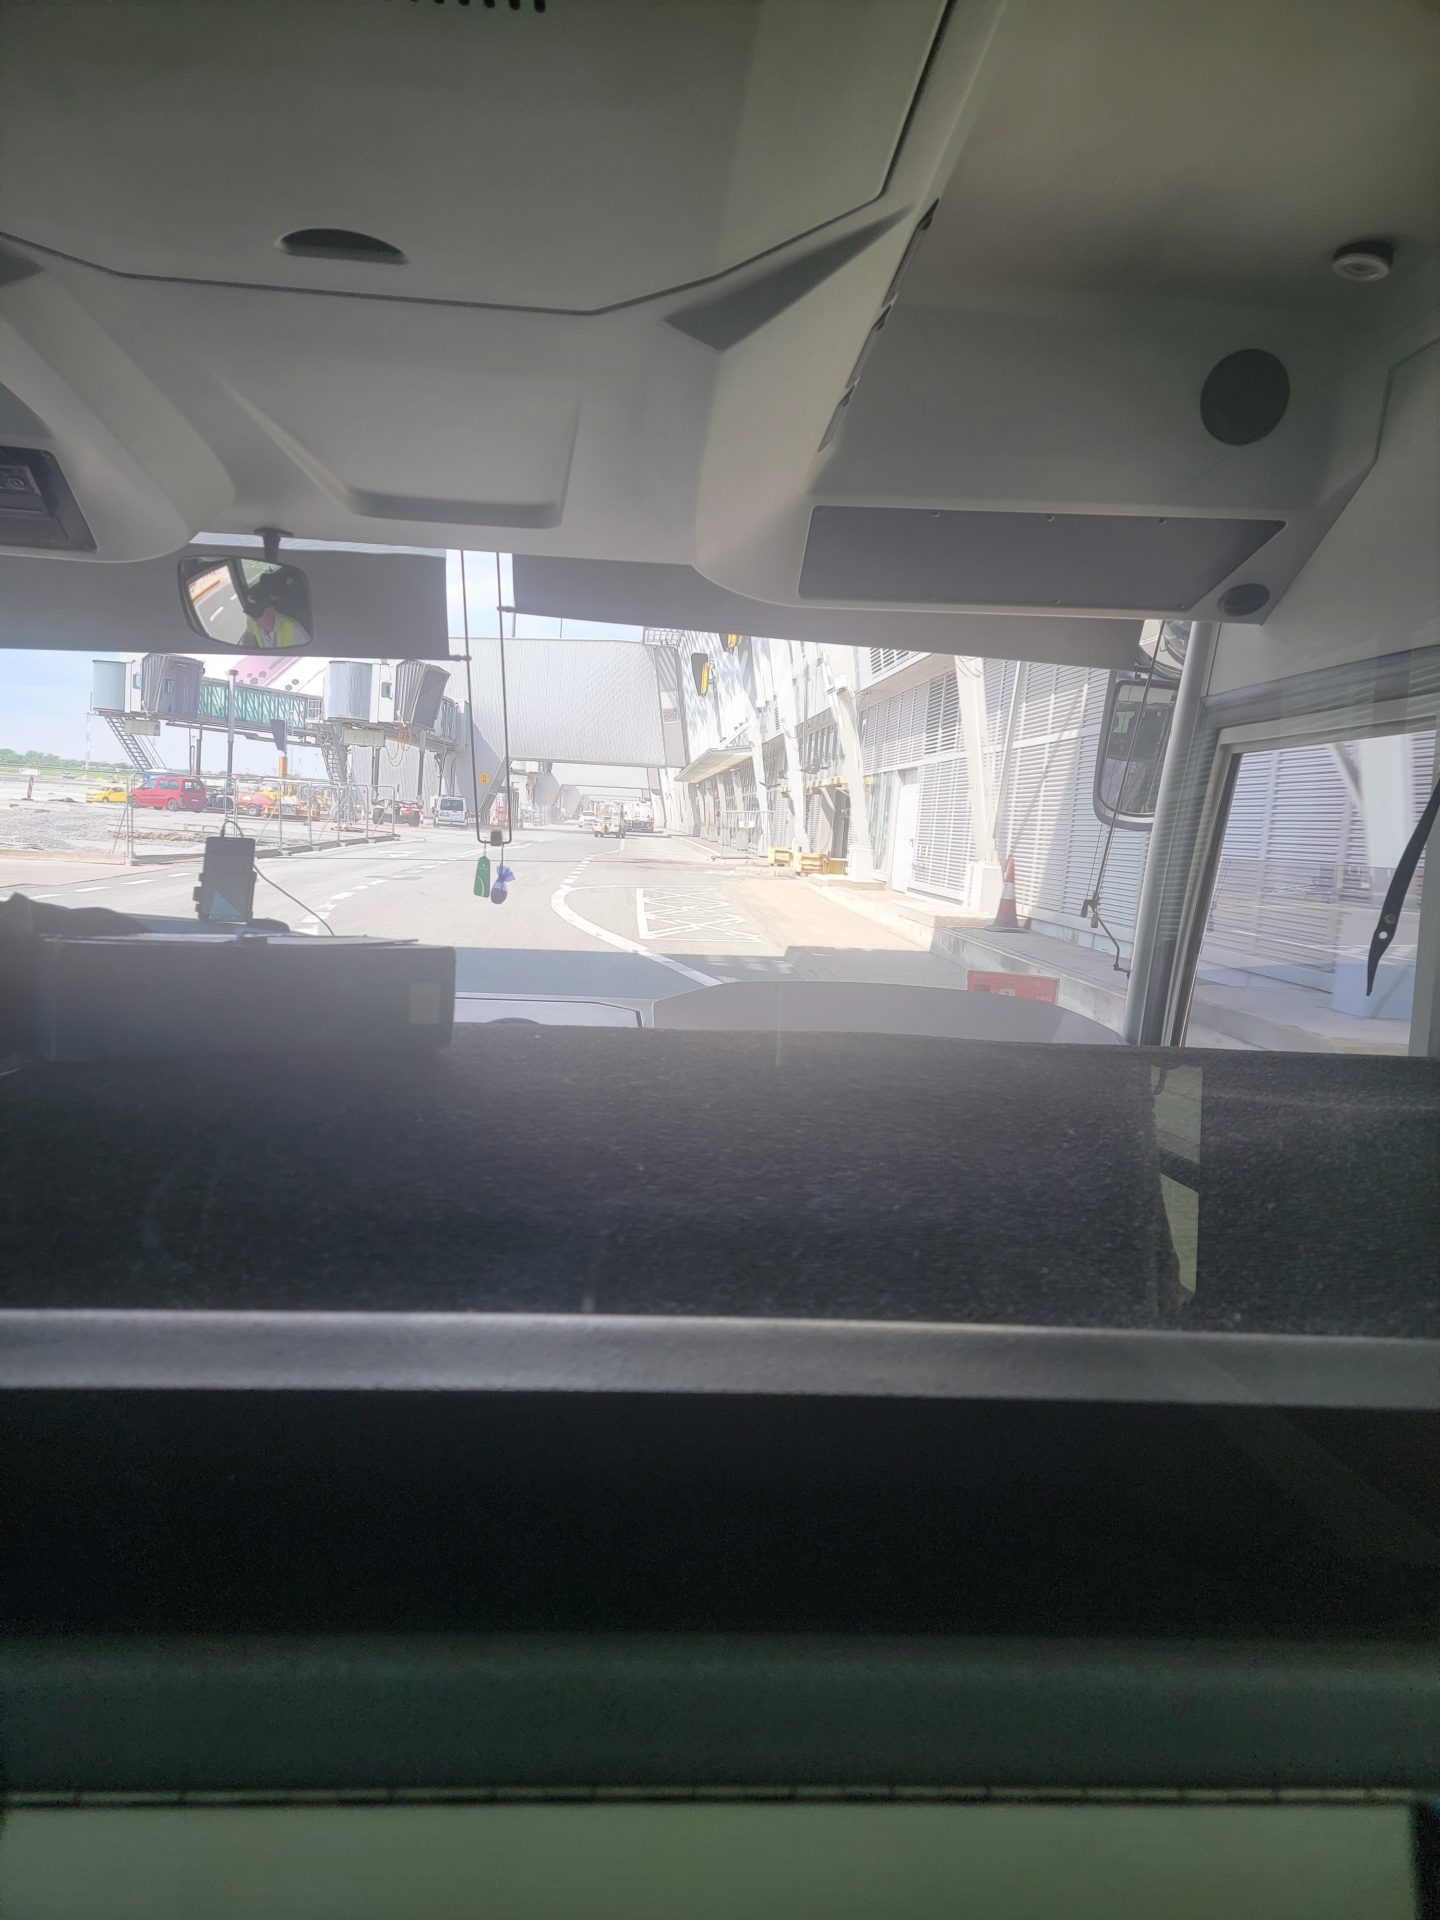 a view from inside of a vehicle